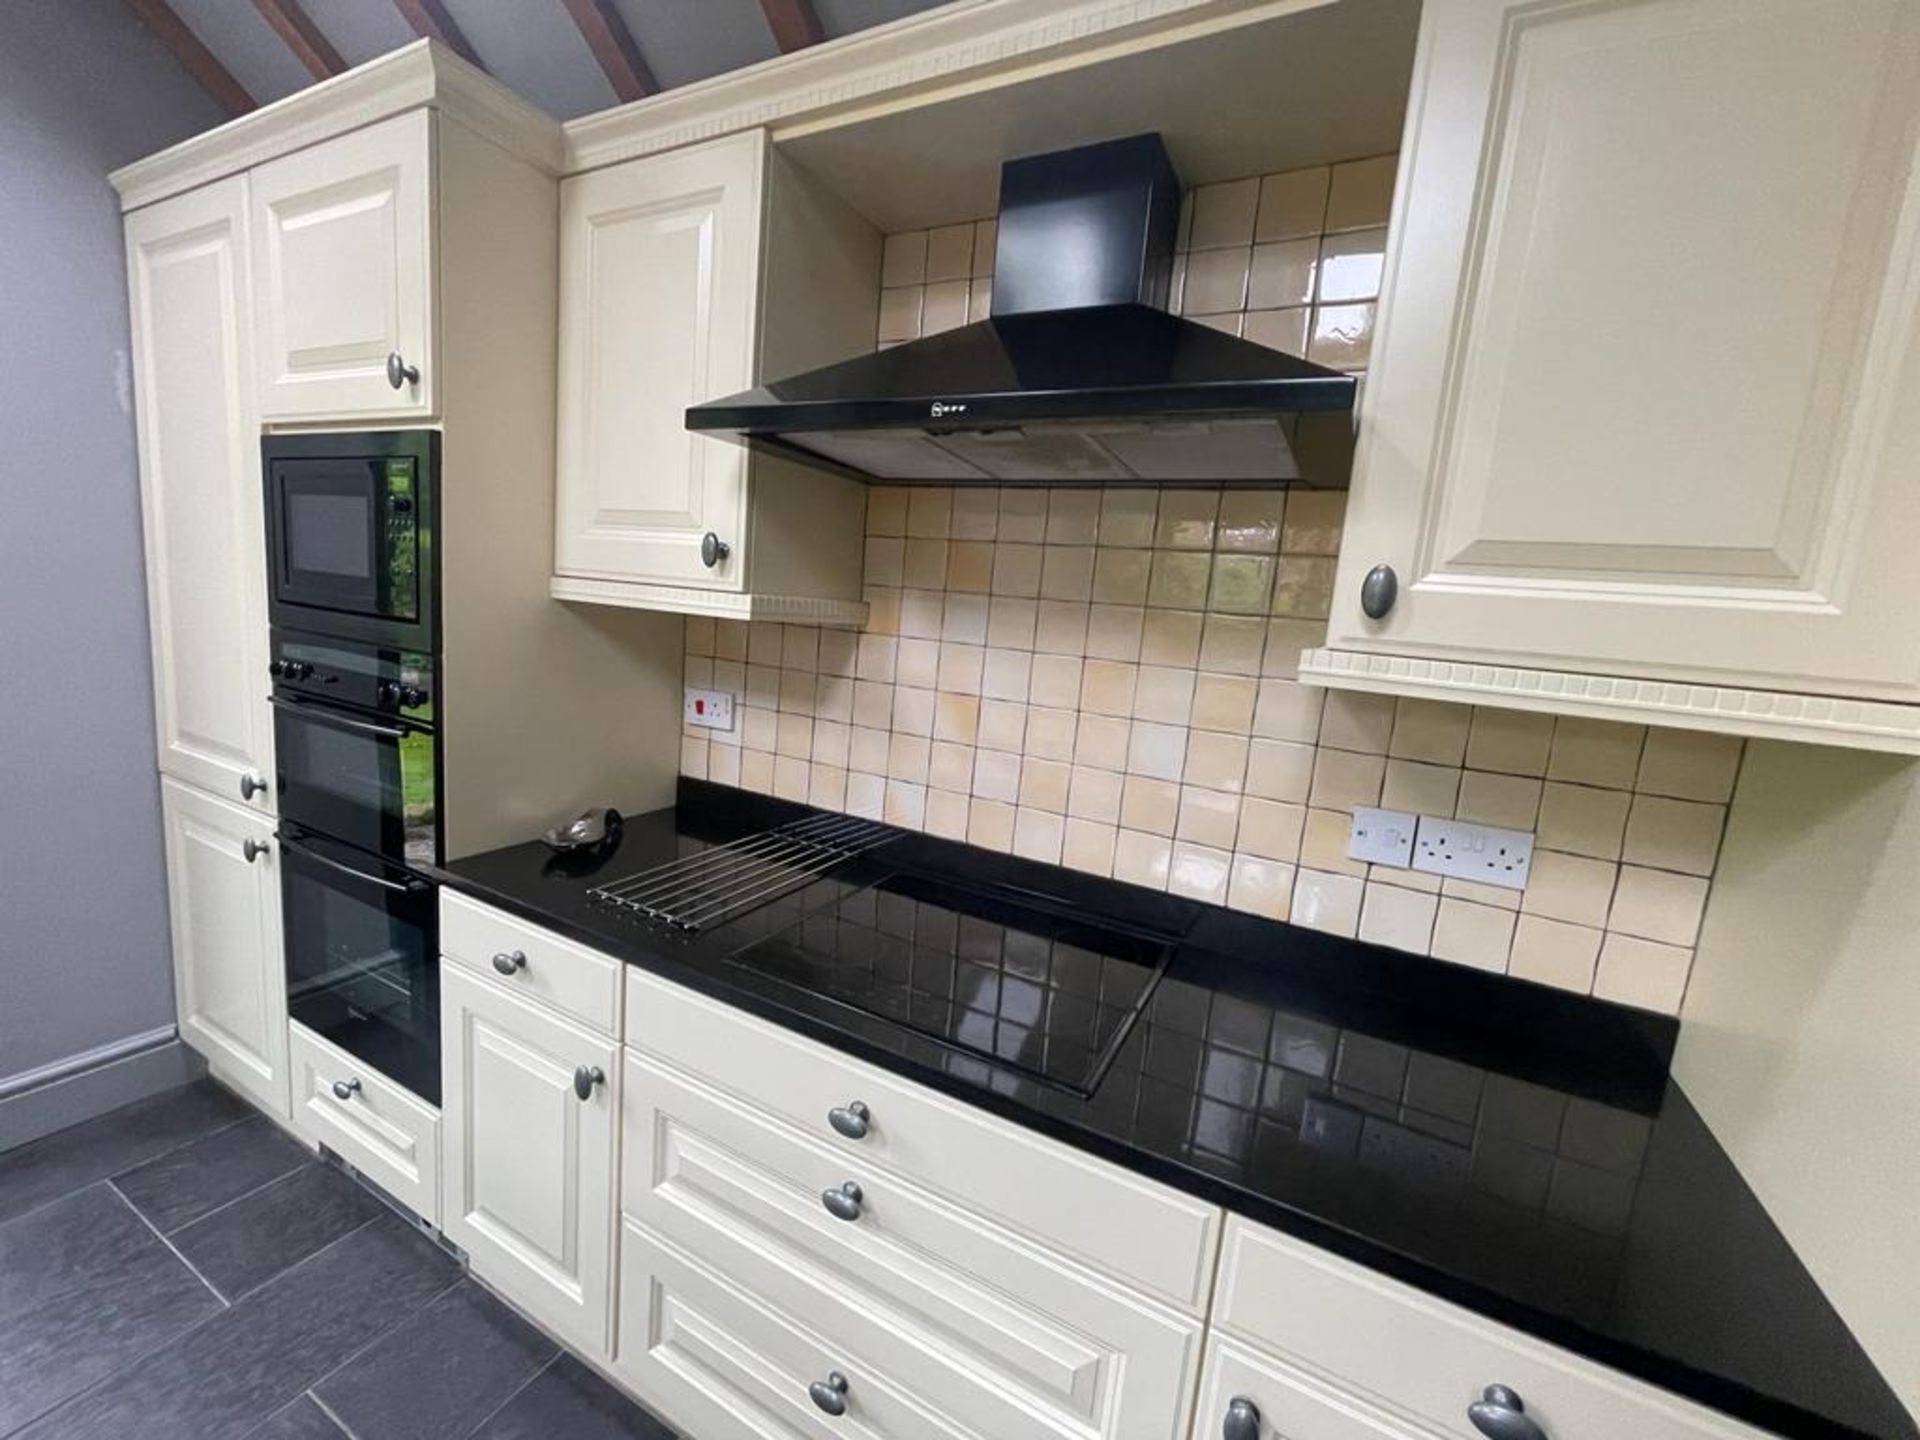 1 x Bespoke Keller Kitchen With Branded Appliances - From An Exclusive Property - No VAT On The - Image 92 of 127